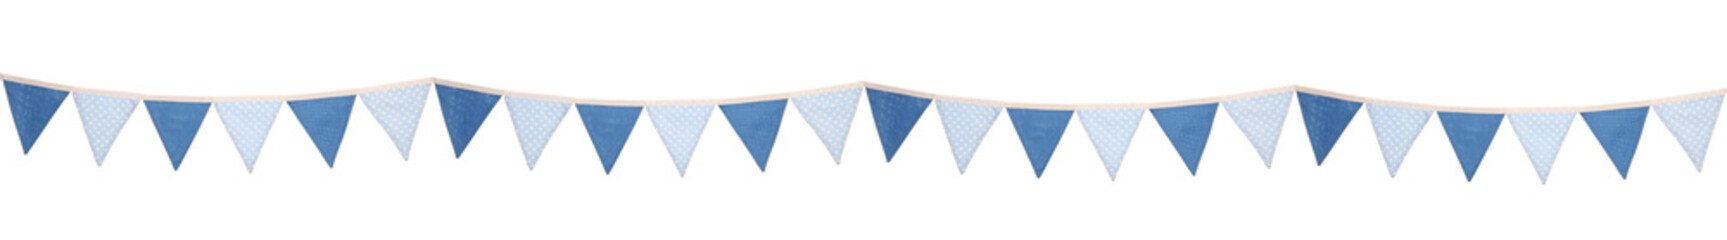 Blue boys birthday party bunting isolated on a white background